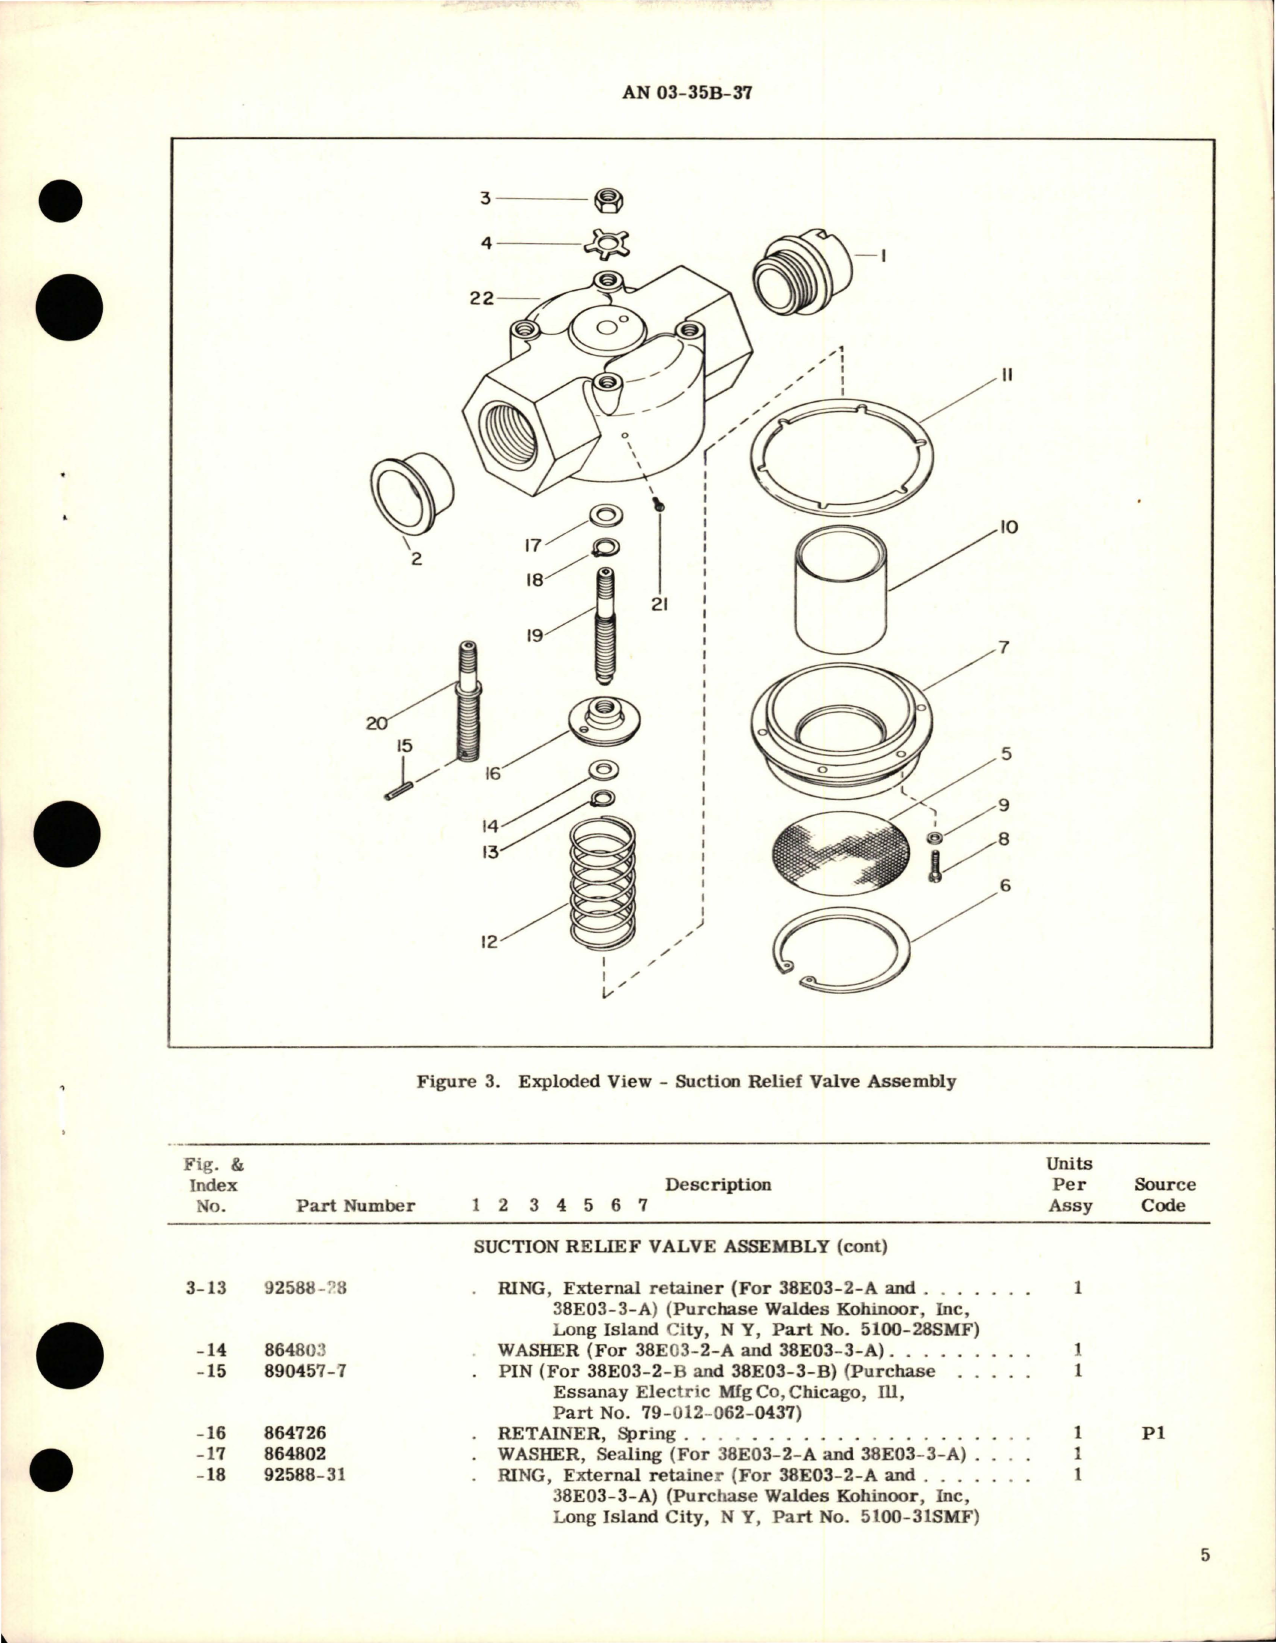 Sample page 5 from AirCorps Library document: Overhaul Instructions with Parts Breakdown for Suction Relief Valve - Parts 38E03-2-A, 38E03-2-B, 38E03-3-A, and 38E03-3-B